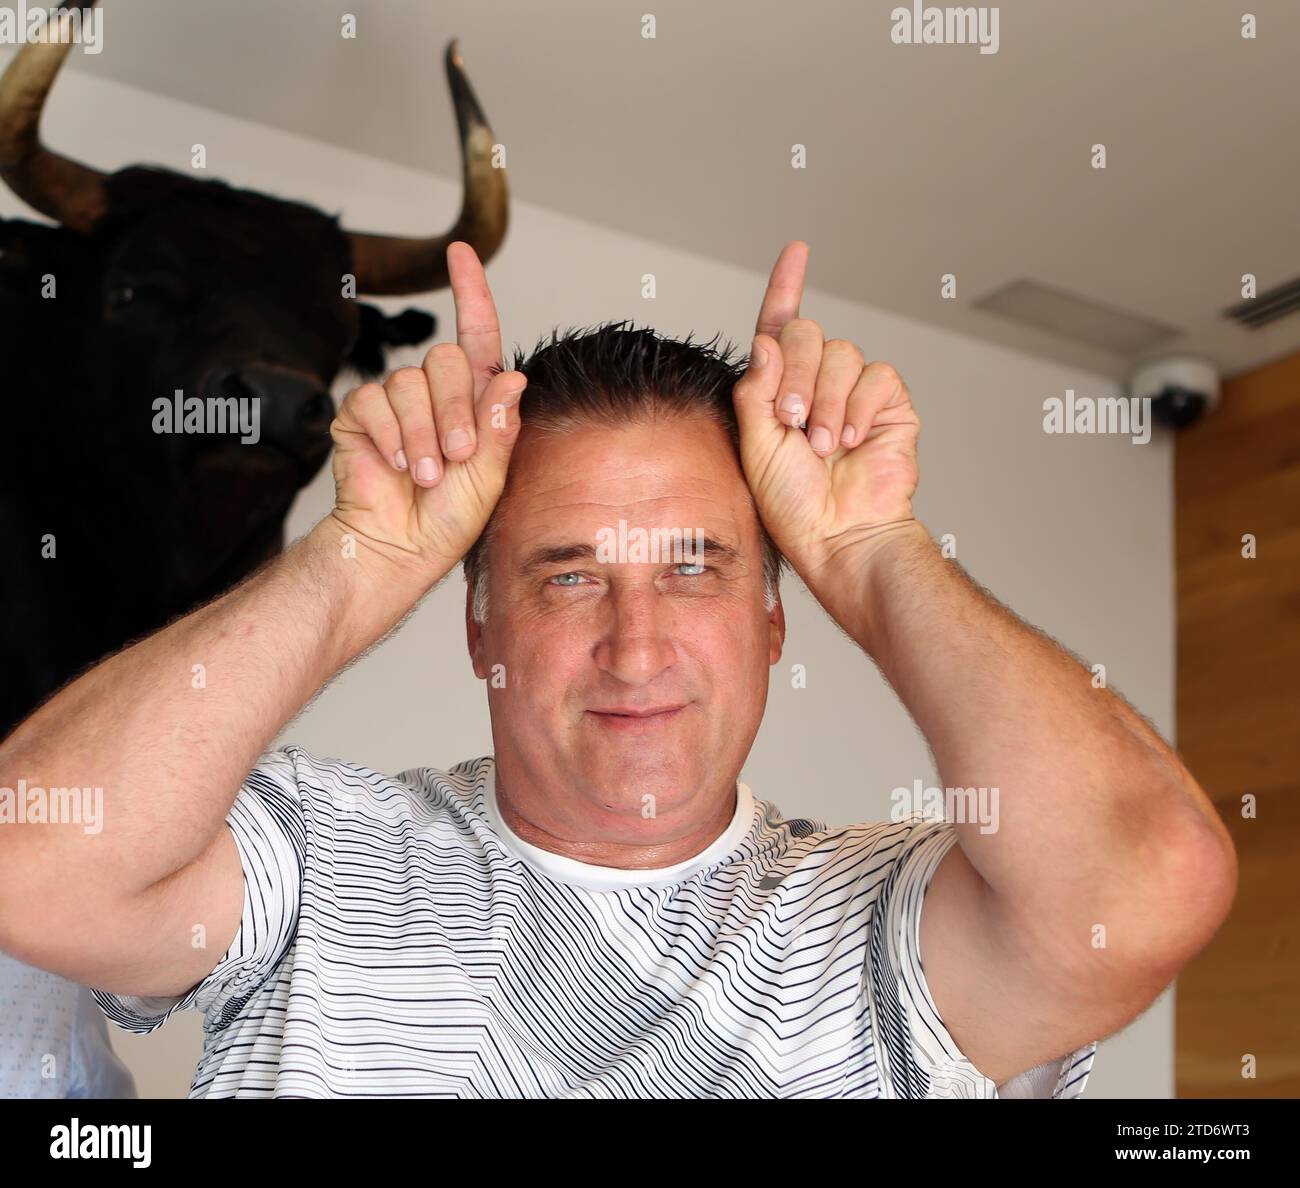 Madrid. 7-16-2014. Interview with the director and actor of the film Helen Alone; in the image Daniel Baldwin.-photo Ernesto Acute.archdc. Credit: Album / Archivo ABC / Ernesto Agudo Stock Photo